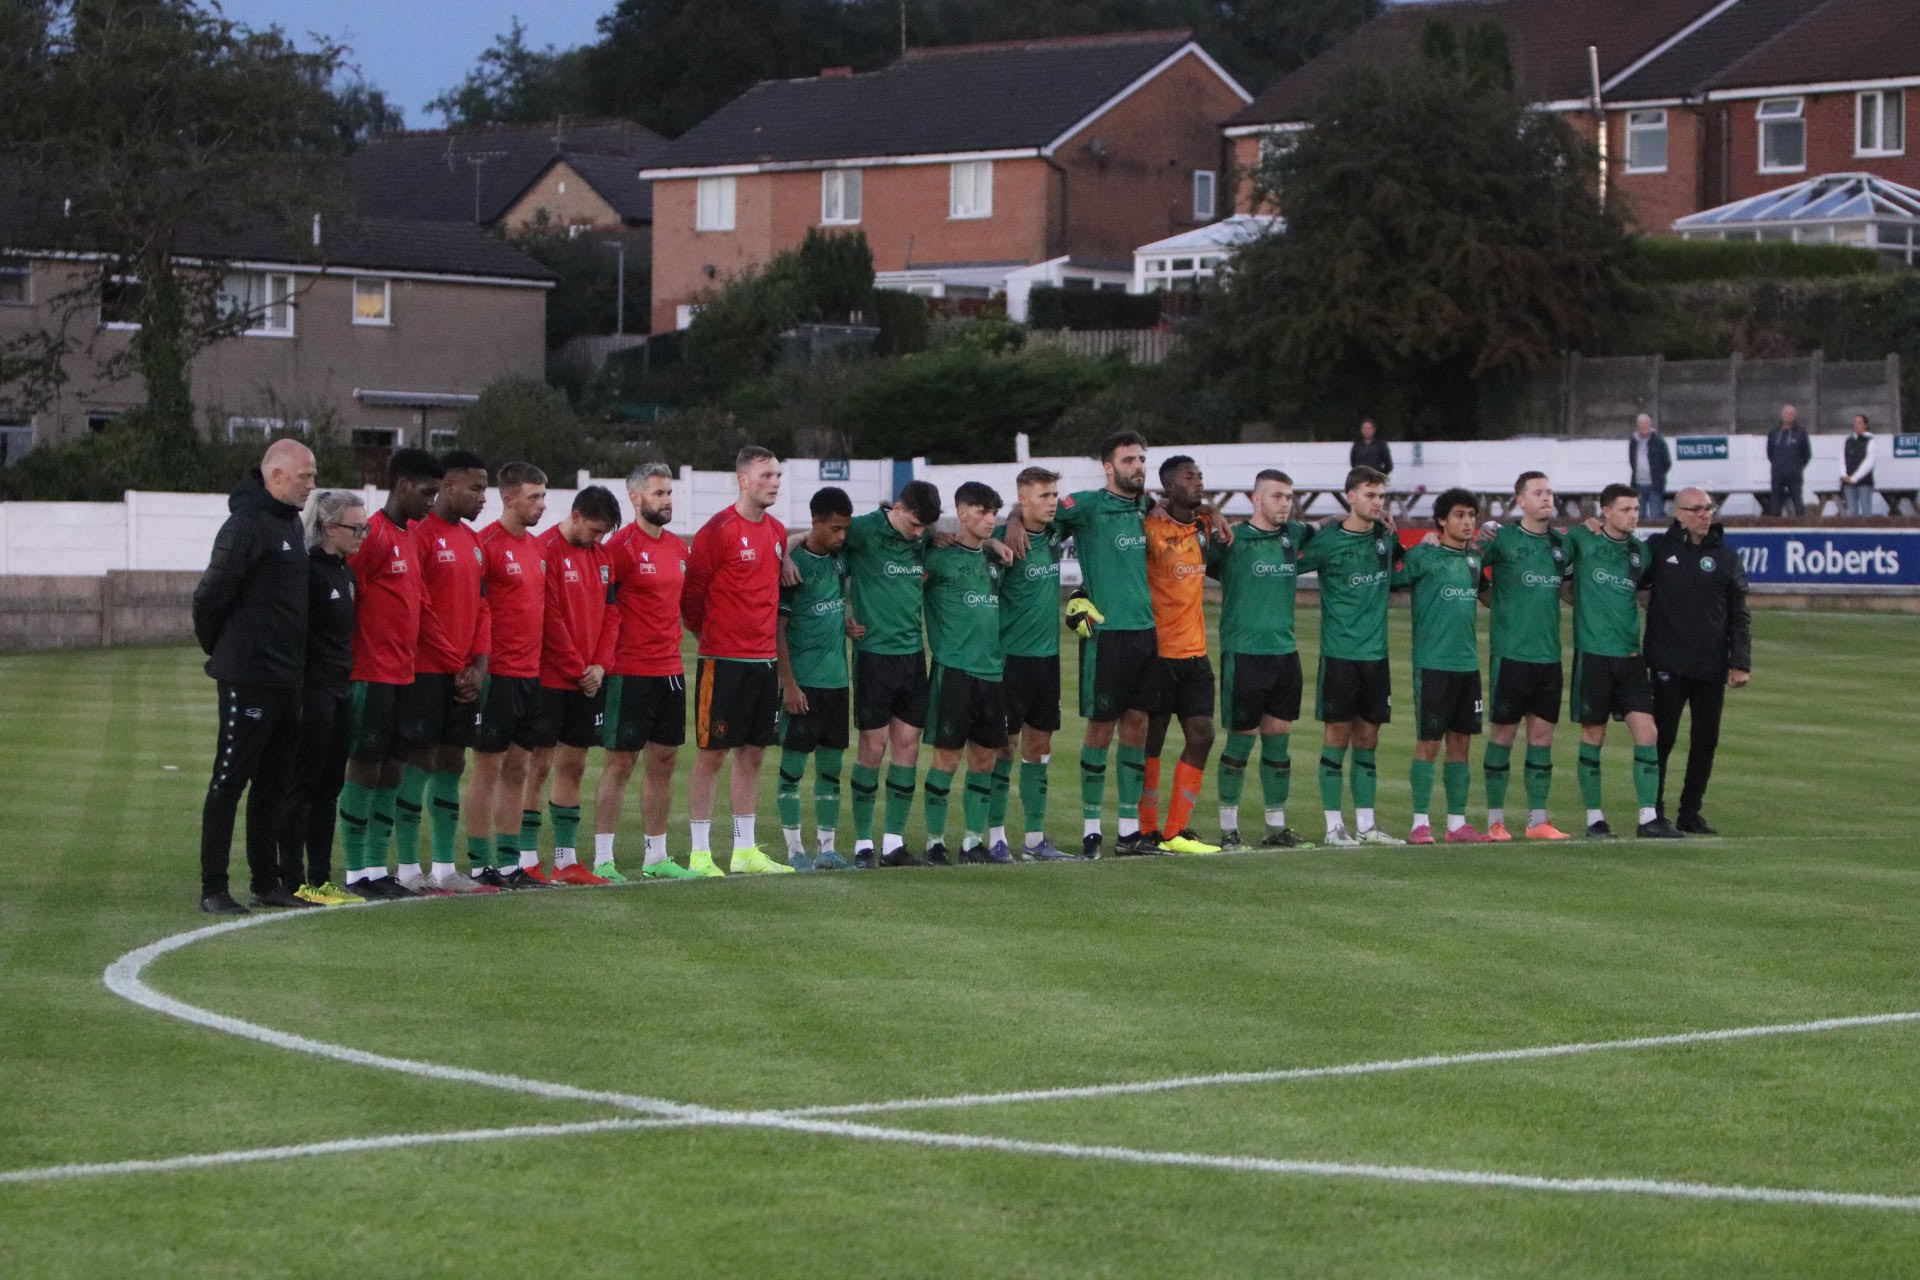 1874 Northwich players and staff observe a minute's silence for HM Queen Elizabeth II 